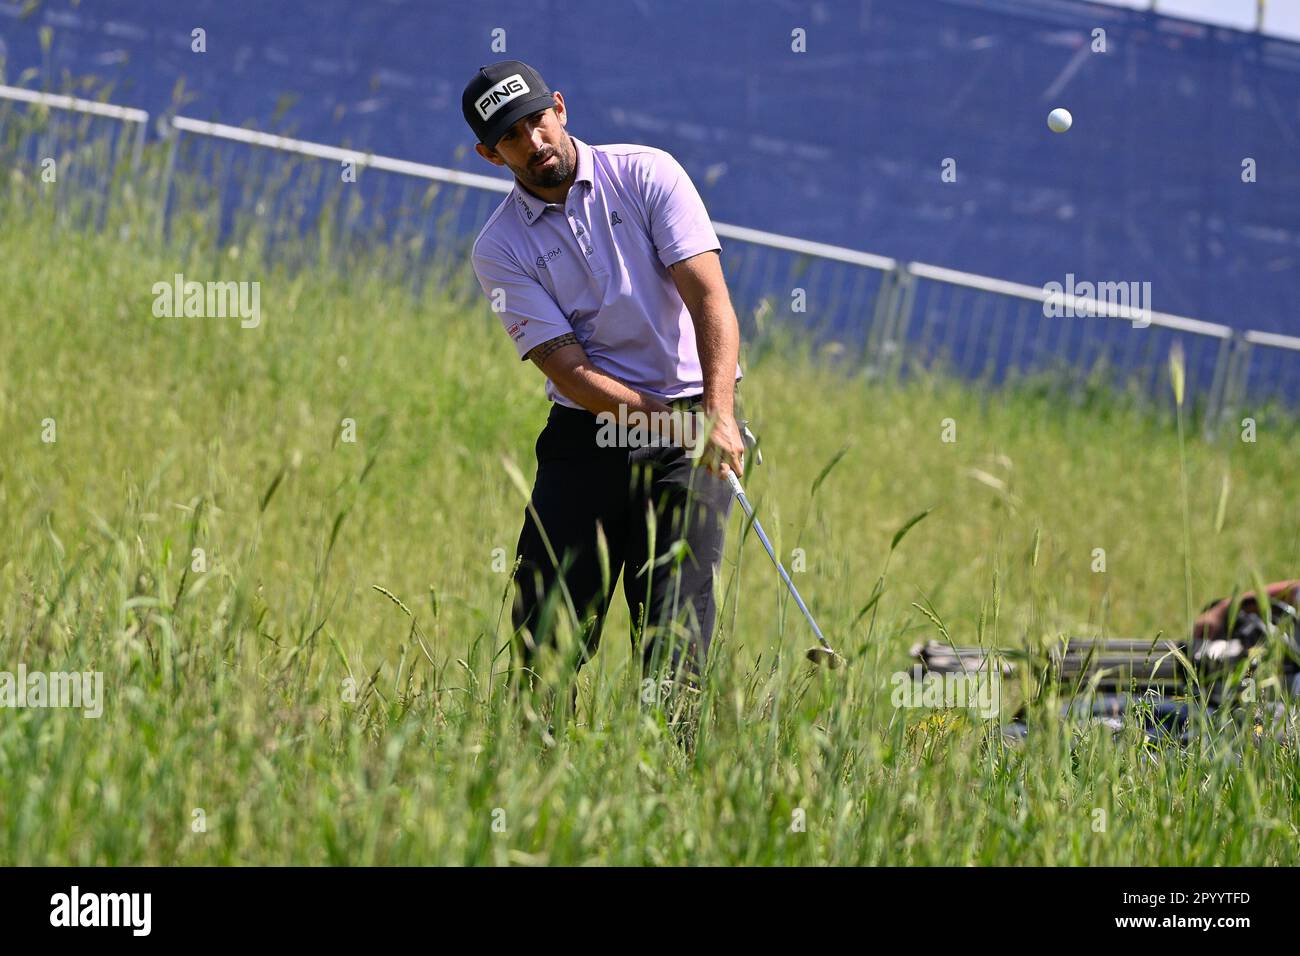 Matthieu Pavon remains two shots clear at halfway stage of Italian Open